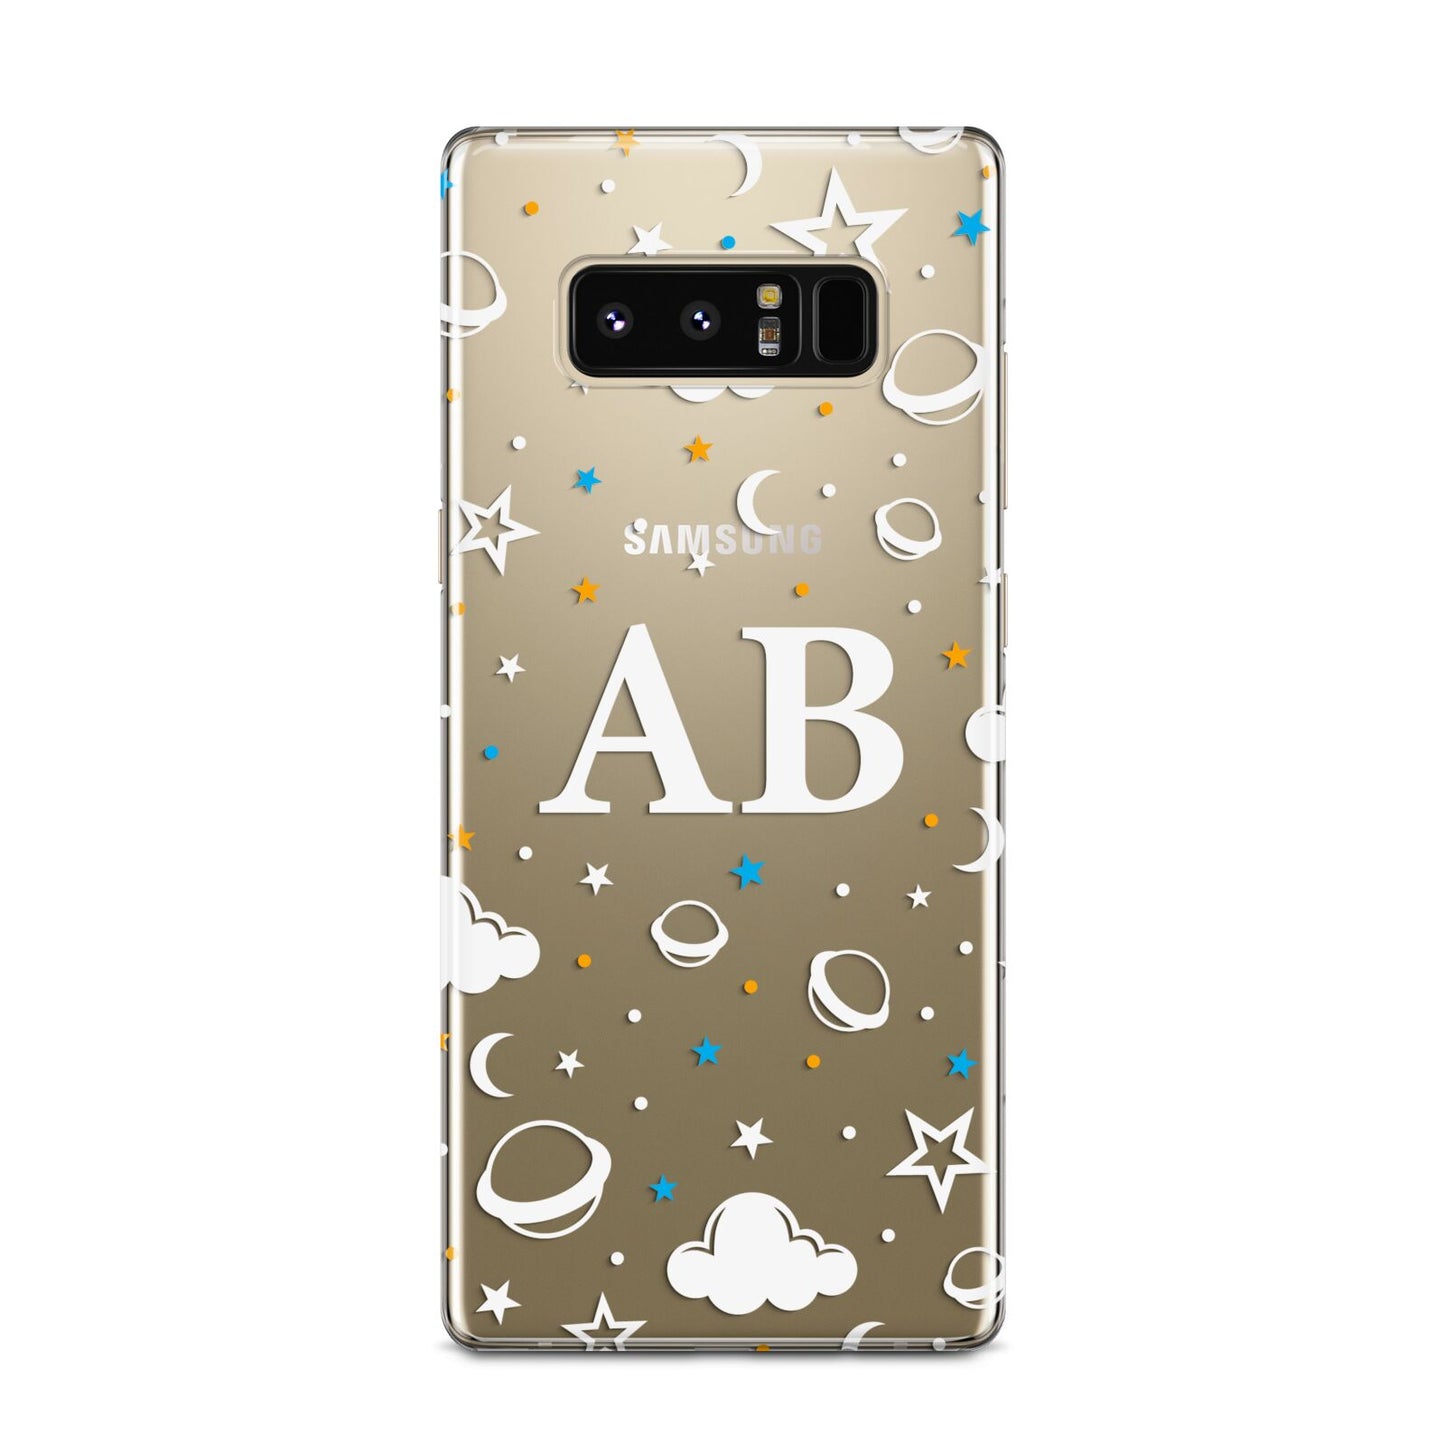 Astronomical Initials Samsung Galaxy Note 8 Case